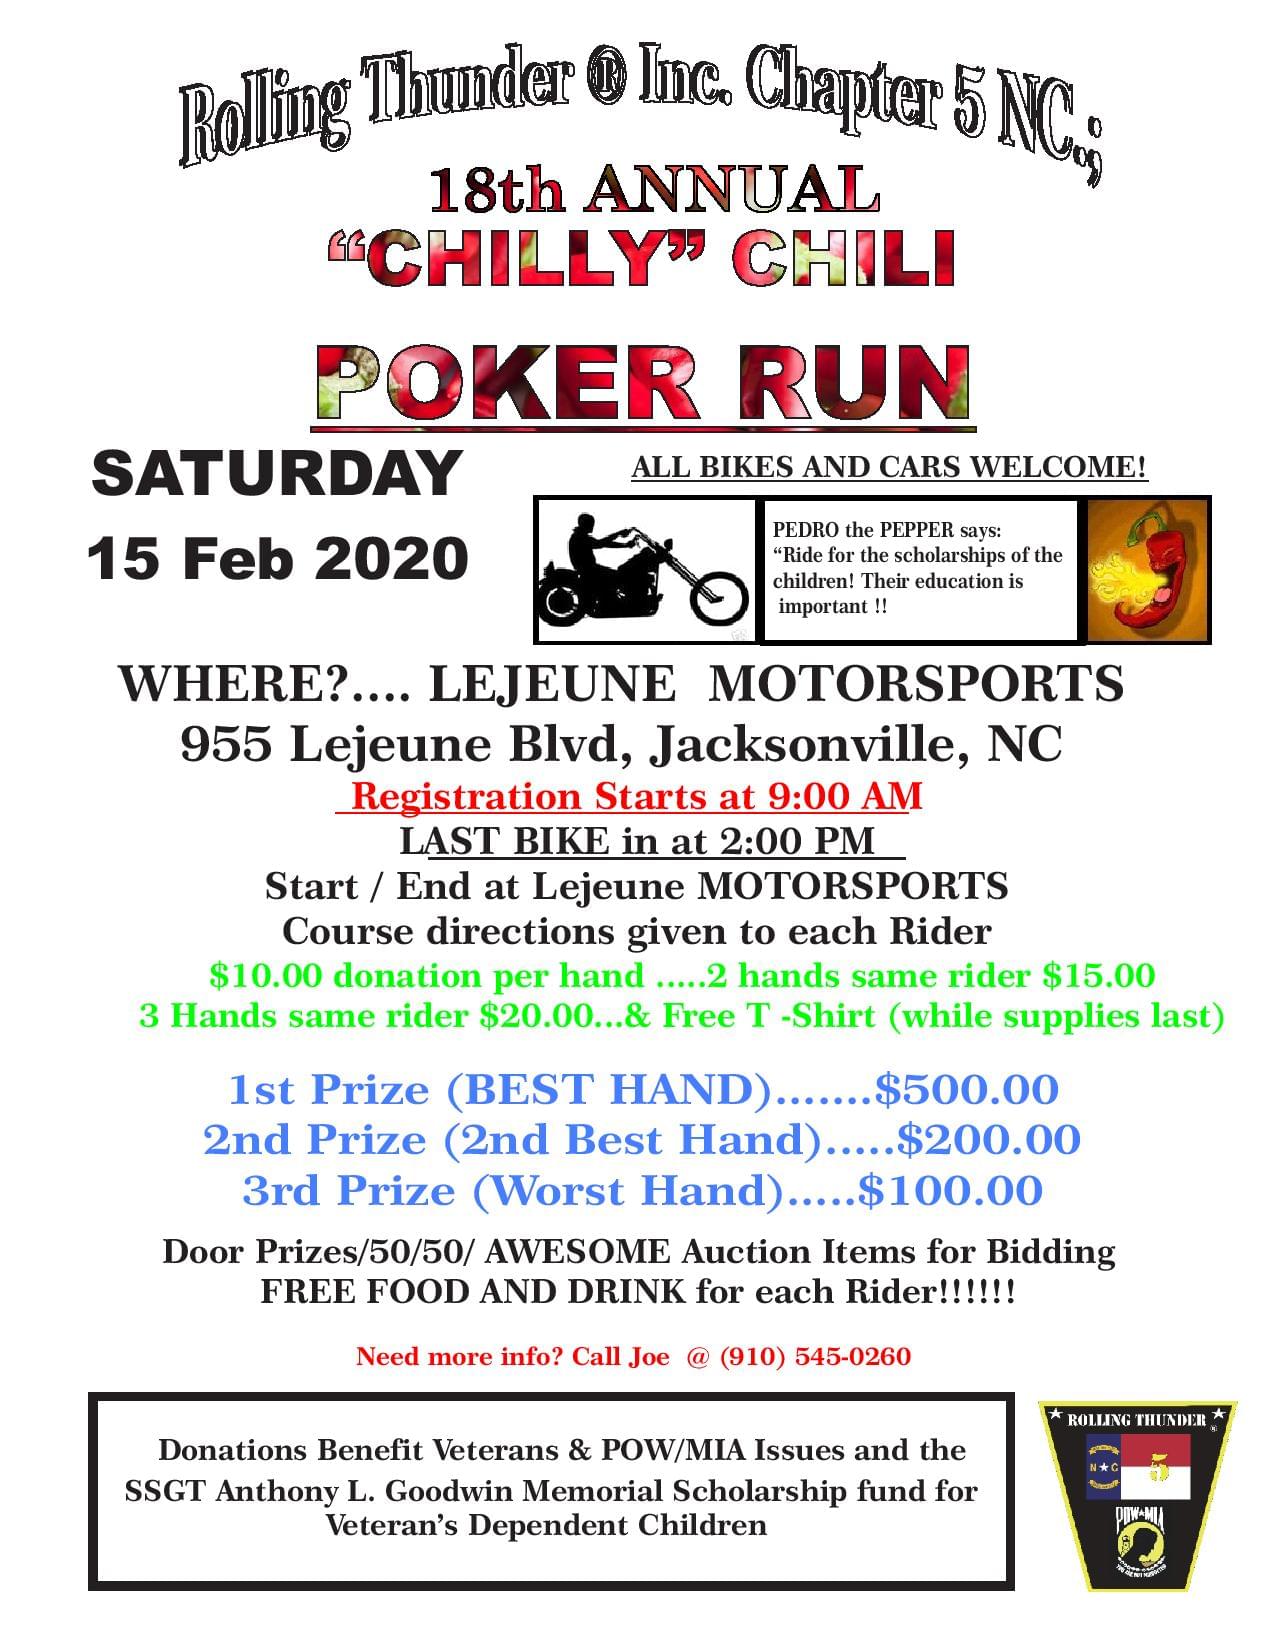 18th Annual Rolling Thunder®, Inc. NC 5 Chilly Chili Poker Run